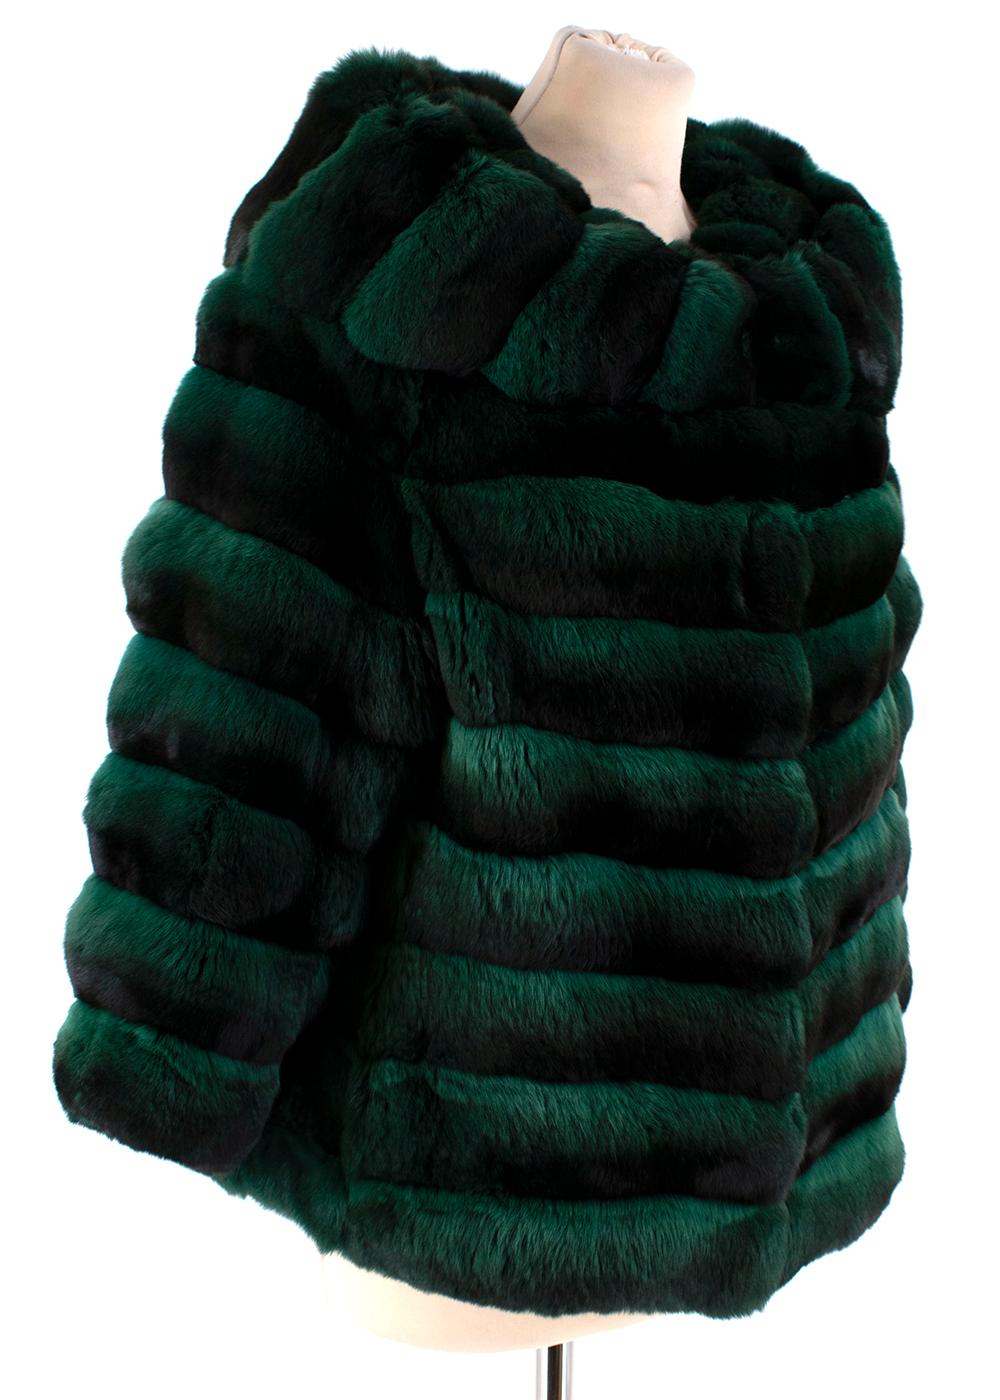 Carmen Marc Valvo Couture Chinchilla Jacket

- Luxuriously soft chinchilla Fur
- Extra panel of fun around the neckline
- Pockets with soft velvet black lining
- Rich emerald green colour with gradient effect
- Heavy weight & very warm
- Black silk